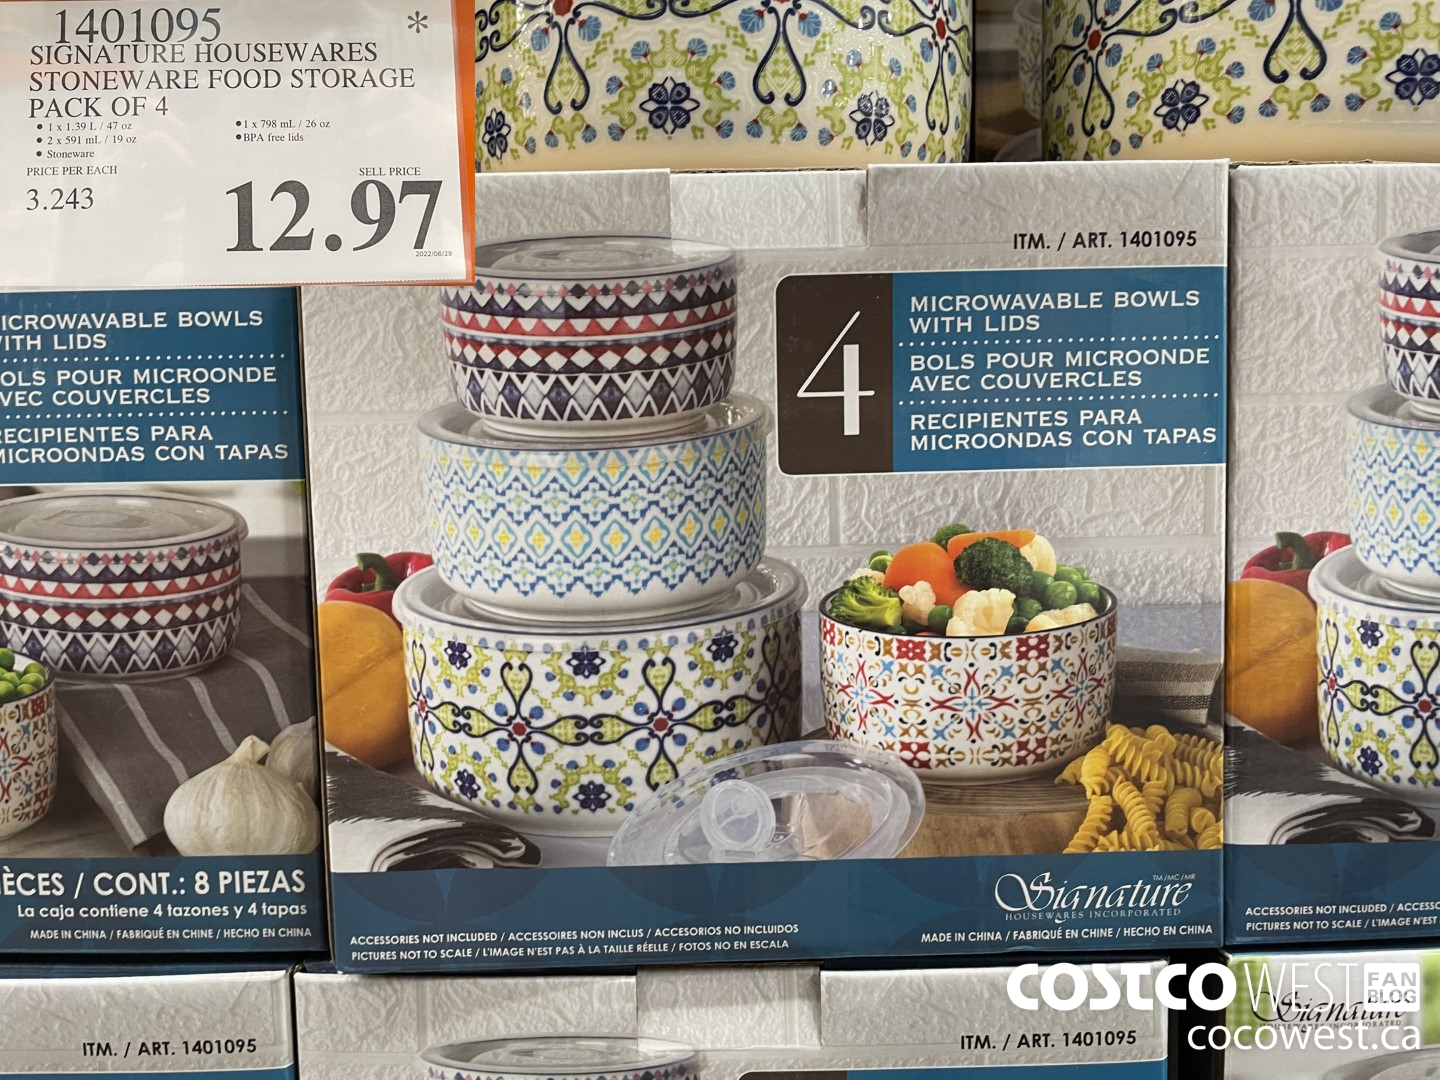 Costco Flyer & Costco Sale Items for July 11-17, 2022 for BC, AB, MB, SK -  Costco West Fan Blog